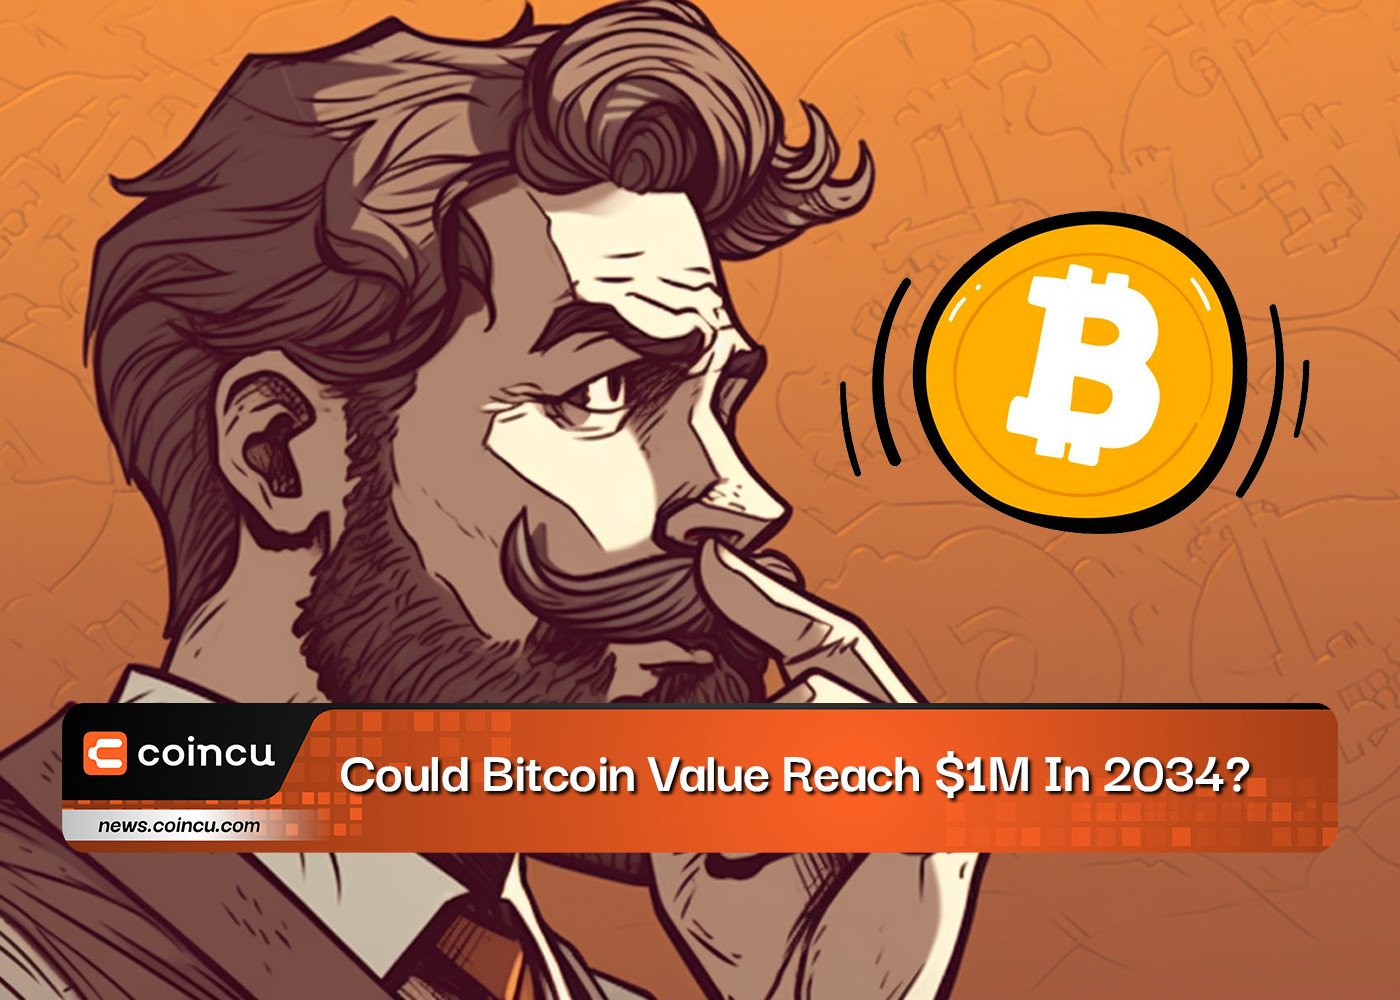 Could Bitcoin Value Reach $1M In 2034?